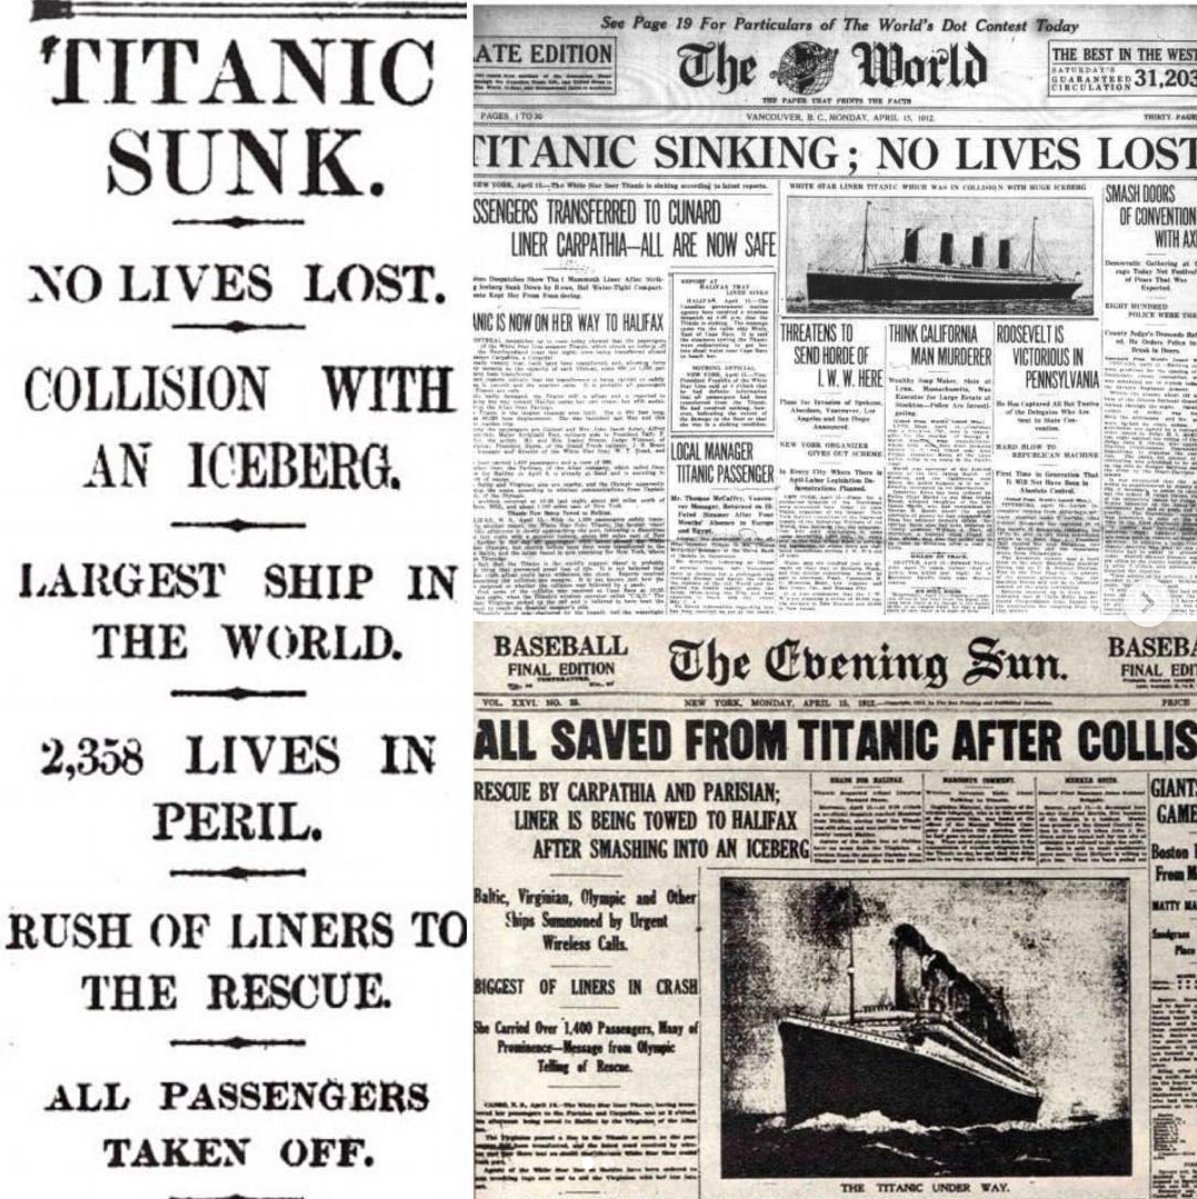 TITANIC SUNK: NO LIVES LOST” – The Original Fake News & The Morgue Ship  Tasked with Recovering Bodies • Dr. Lindsey Fitzharris